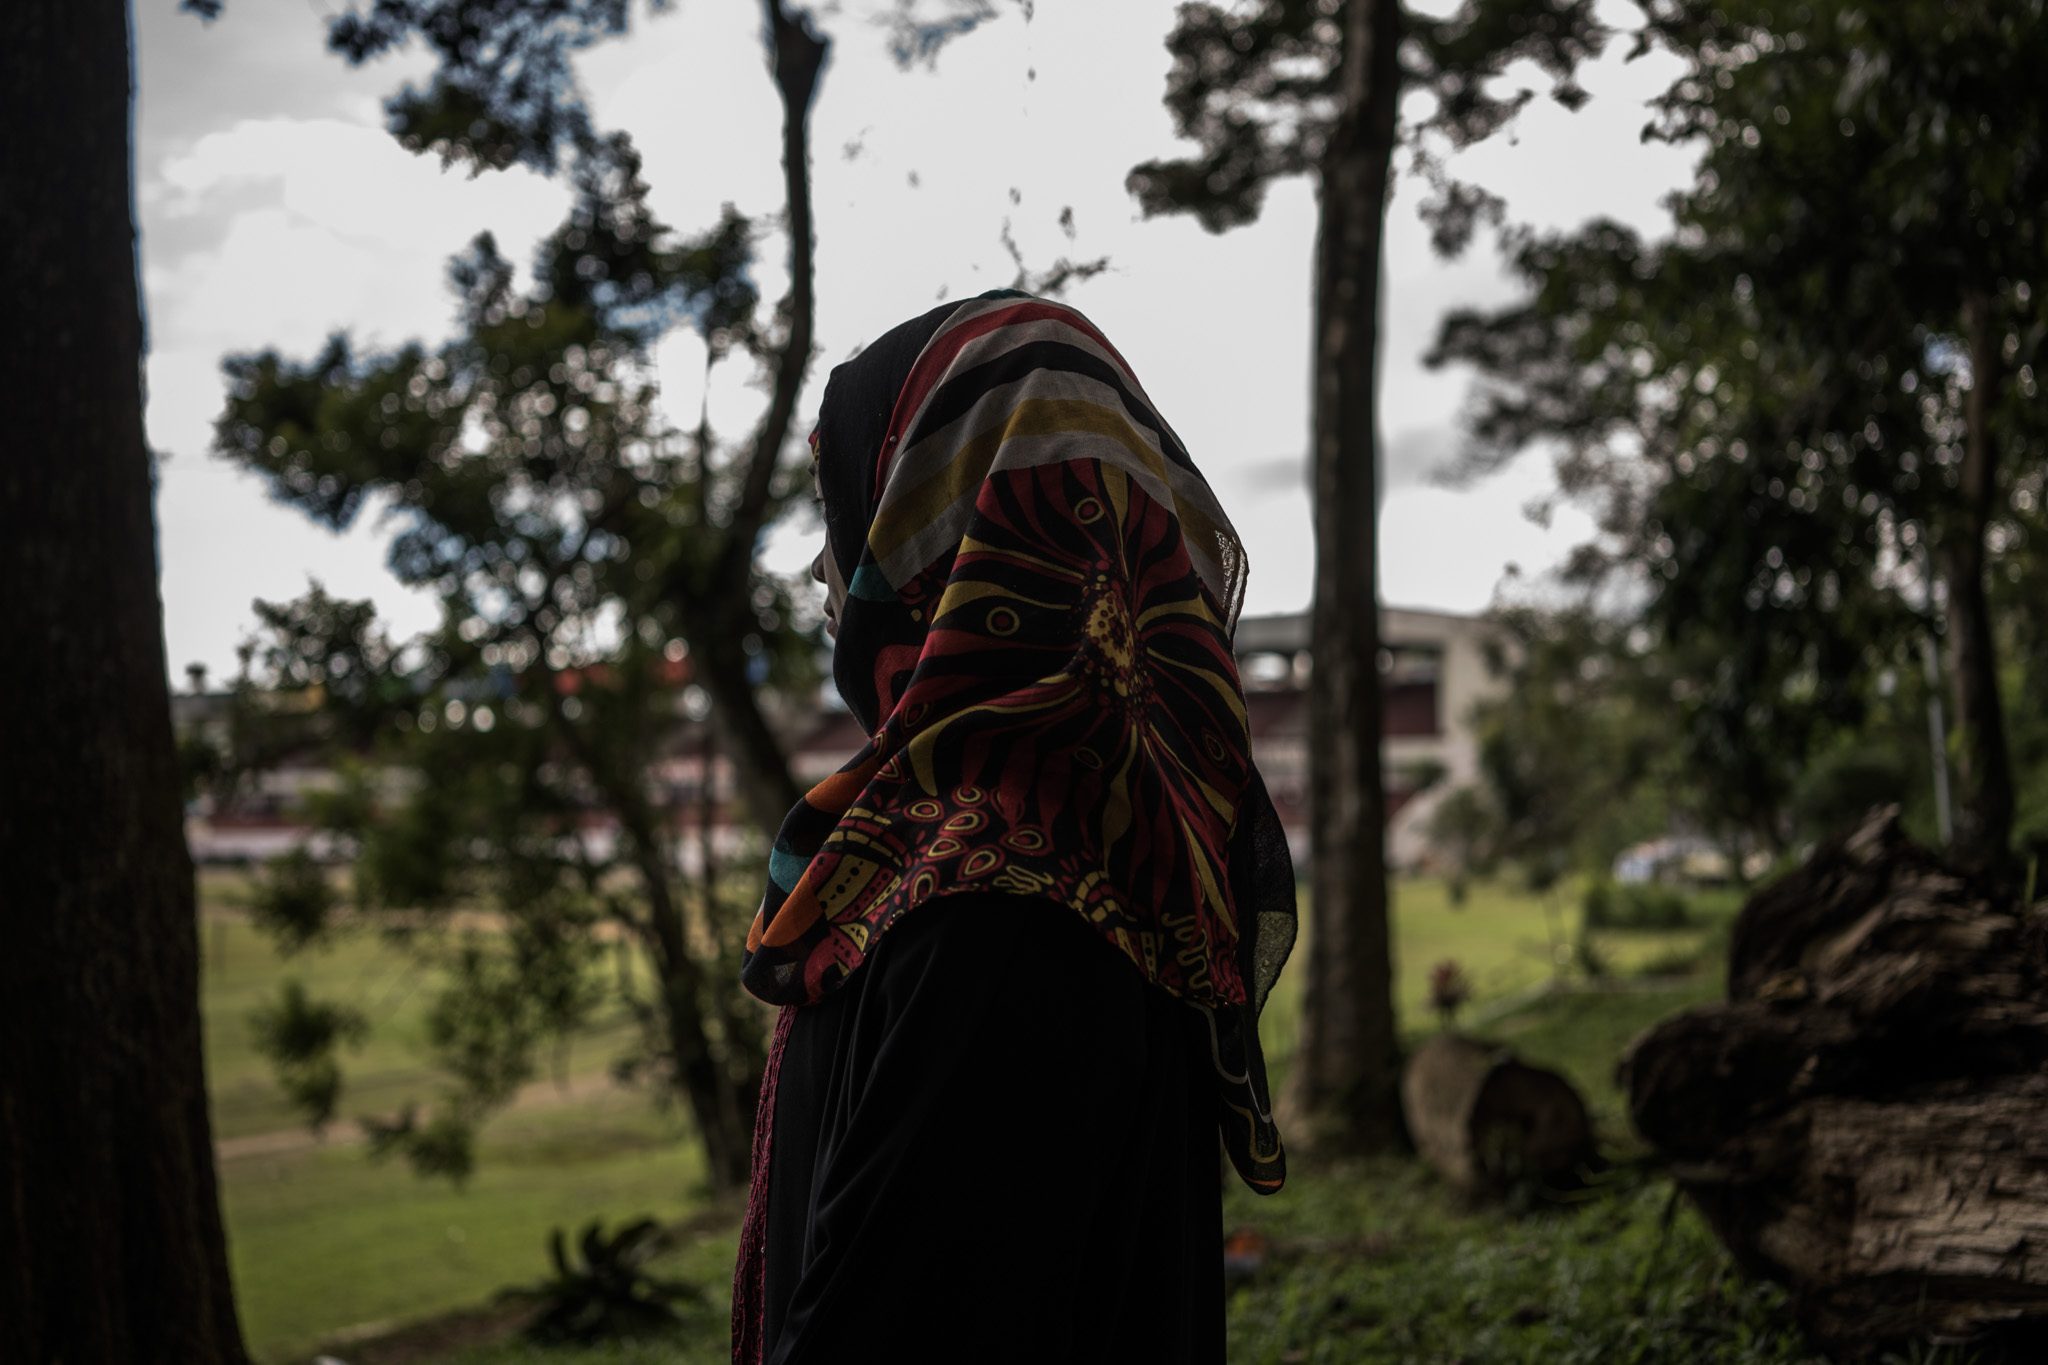 IDEAL DEATH. 'For me, dying as a mujahideen is the ideal death,' says Sakeena, who thought of joining Maute-ISIS training, but was discouraged by her mother. Photo by Martin San Diego/Rappler  